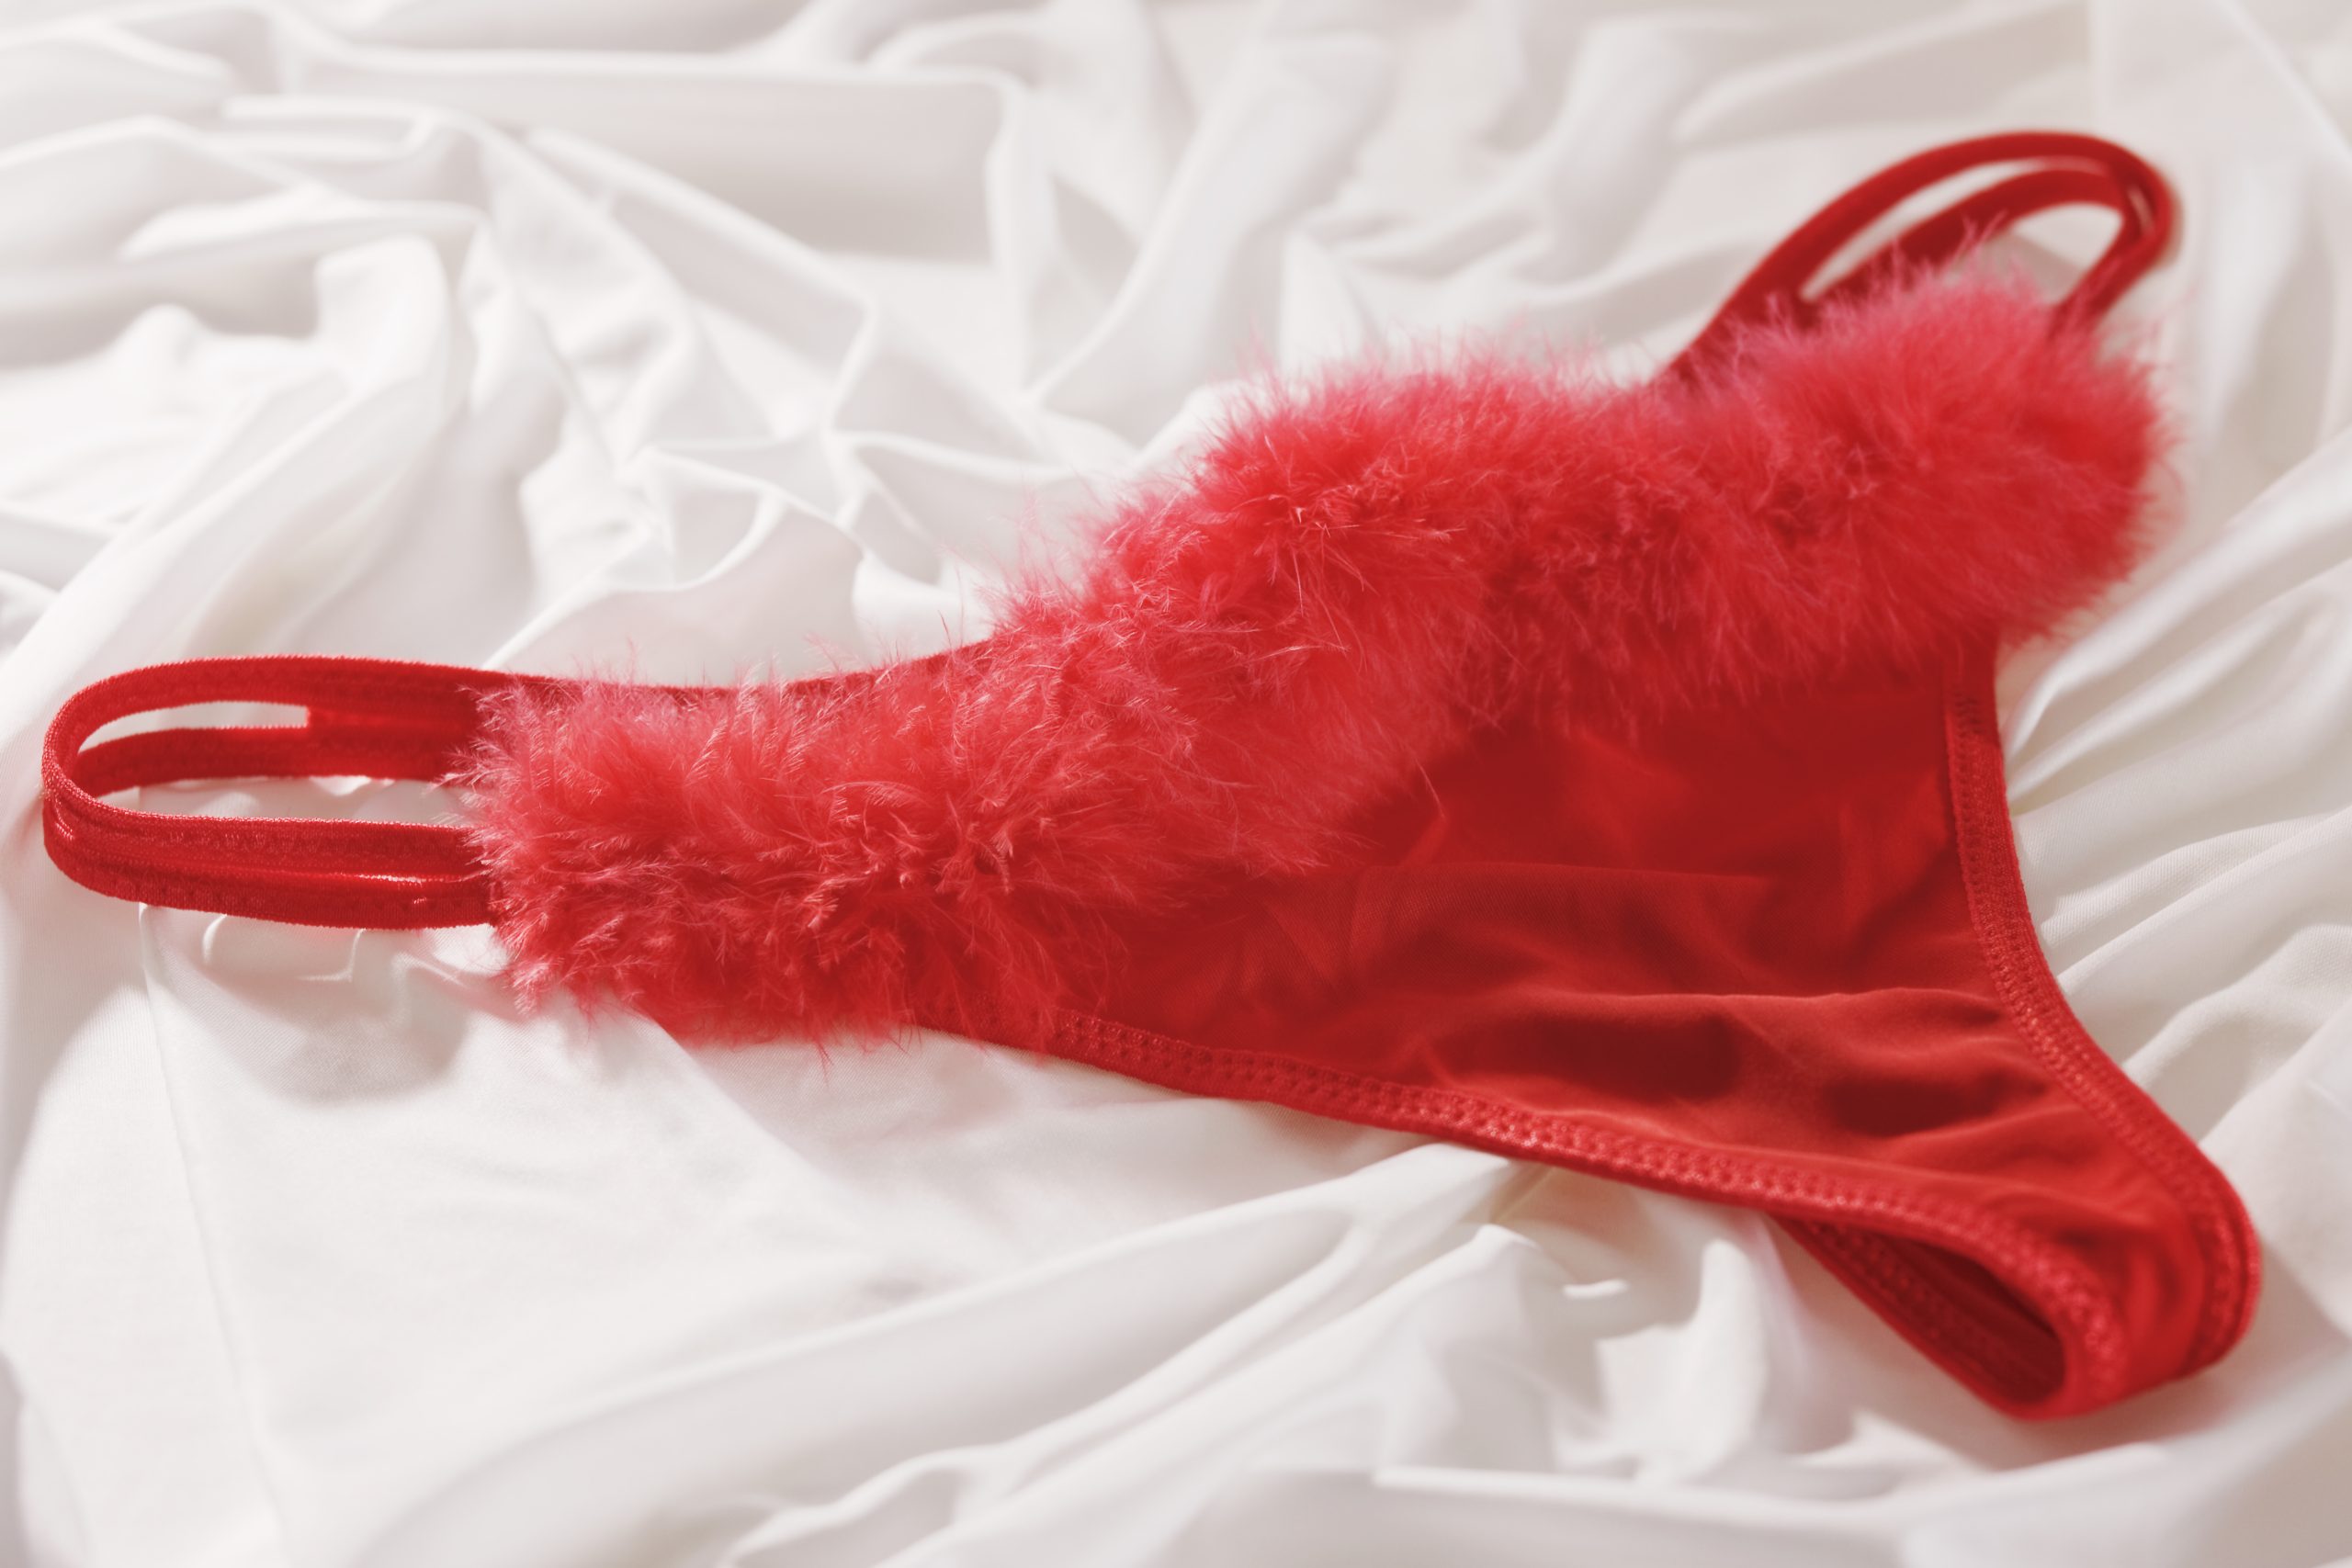 Red Ladies Underwear With Feather Detail, Against White Background